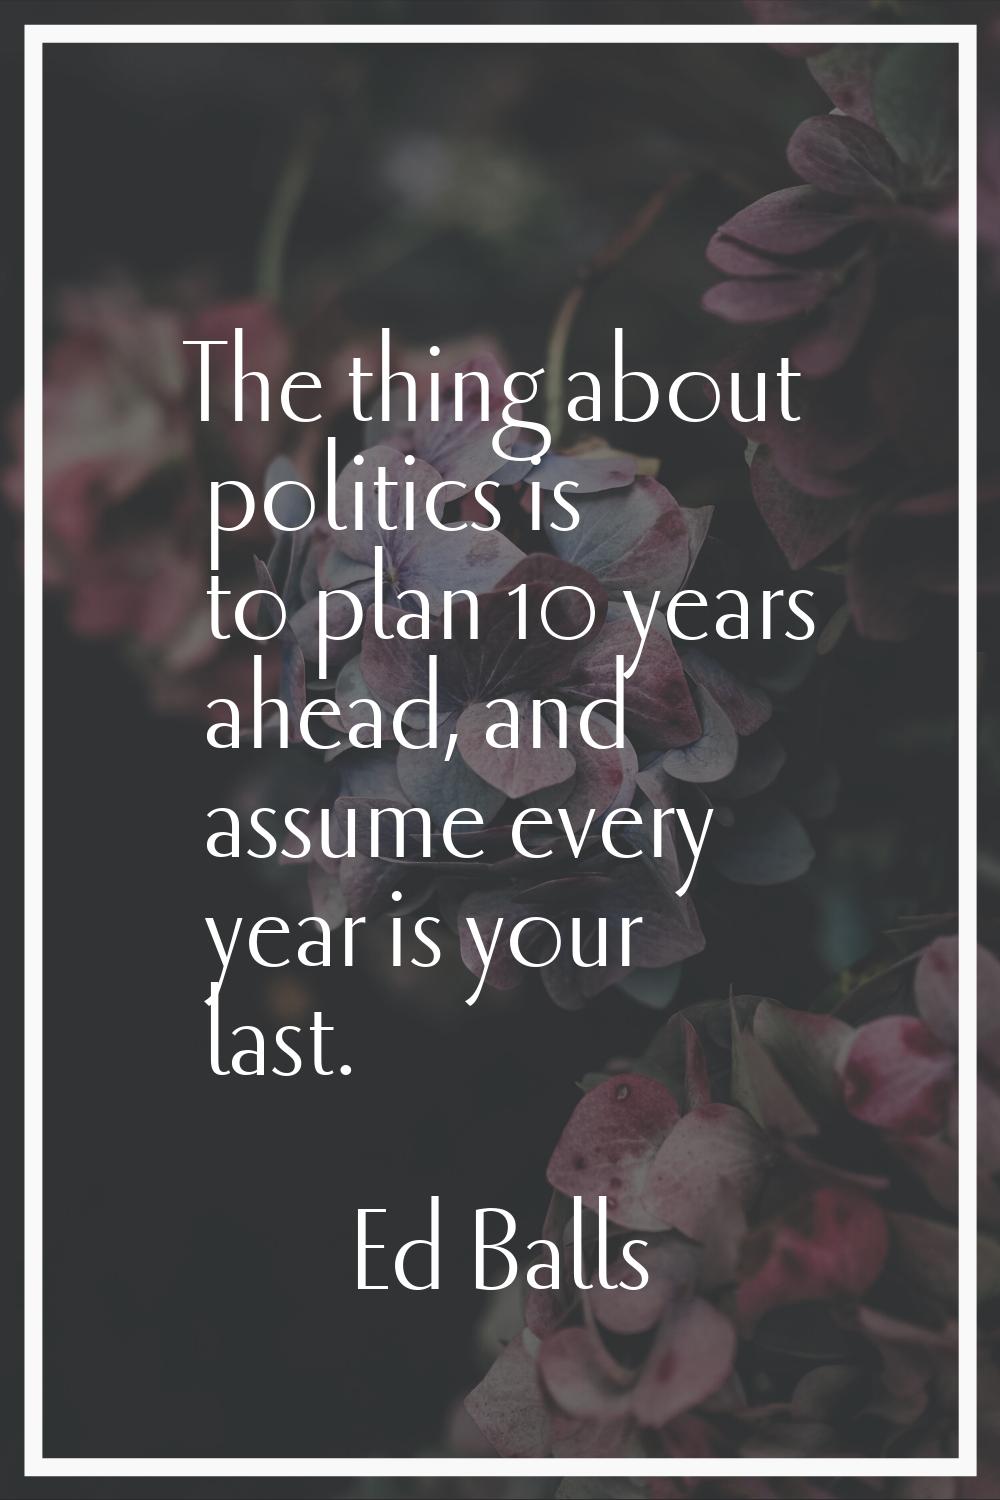 The thing about politics is to plan 10 years ahead, and assume every year is your last.